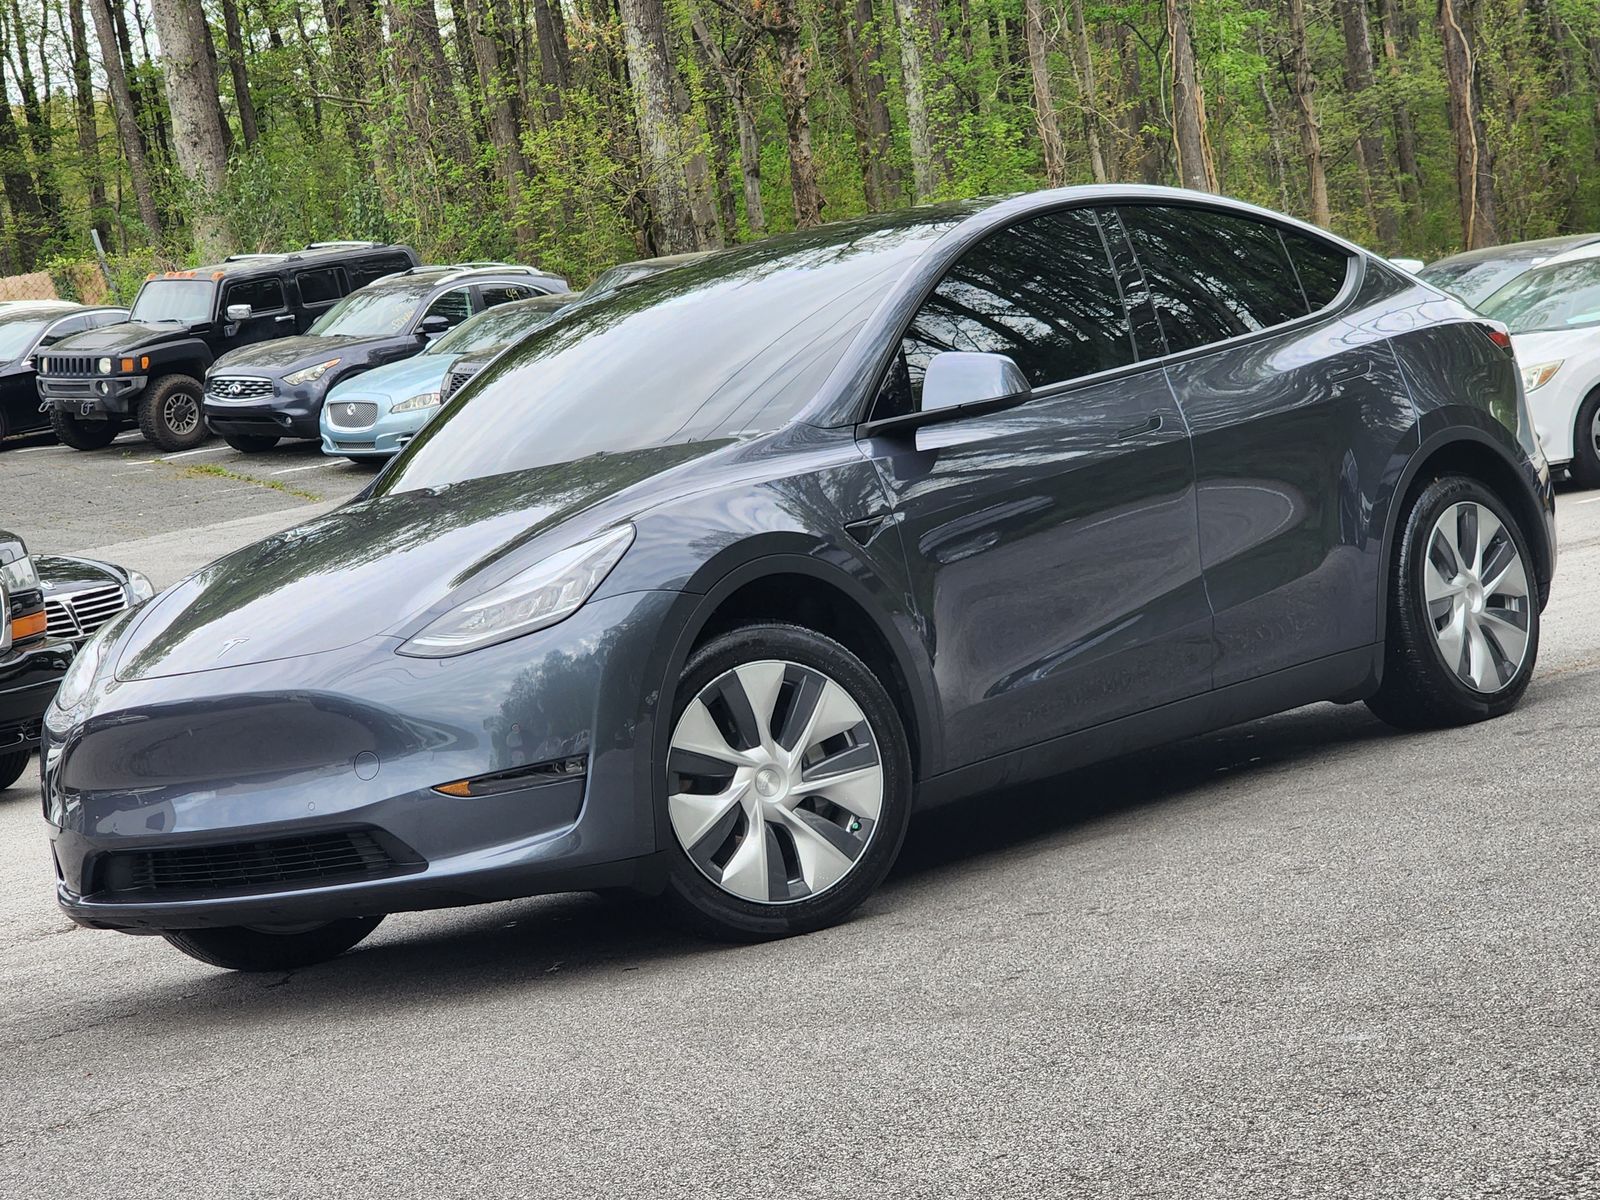 2021 Tesla Model Y VIN 5YJYGDED4MF109408 from the USA PLC Group